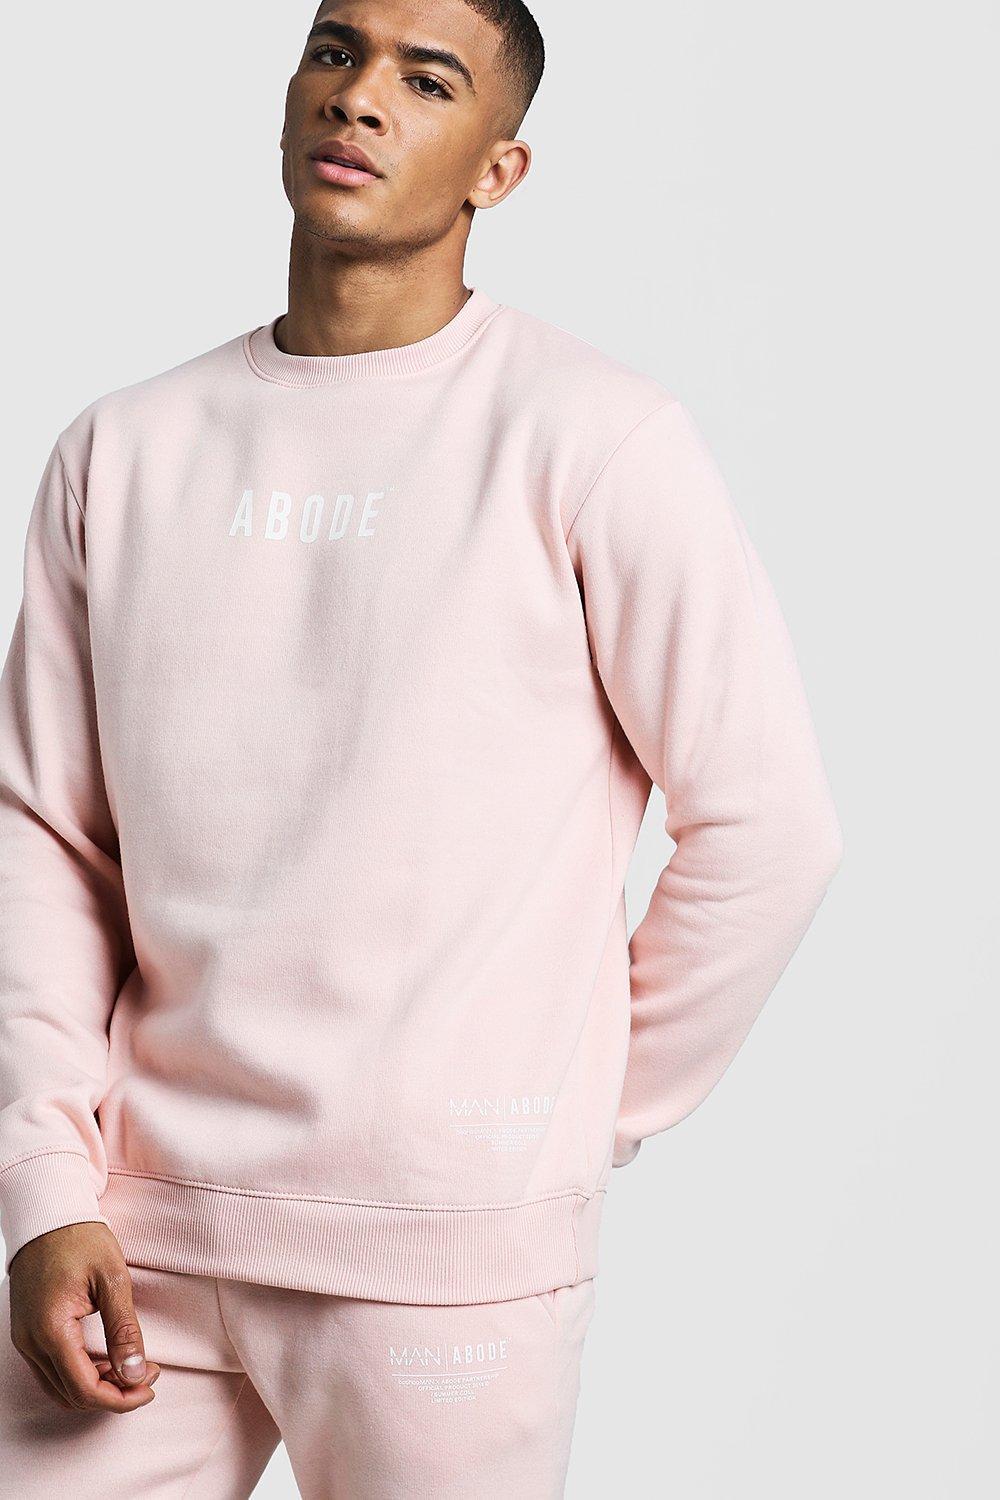 BoohooMAN Man X Abode Sweater Tracksuit in Light Pink (Pink) for Men - Lyst